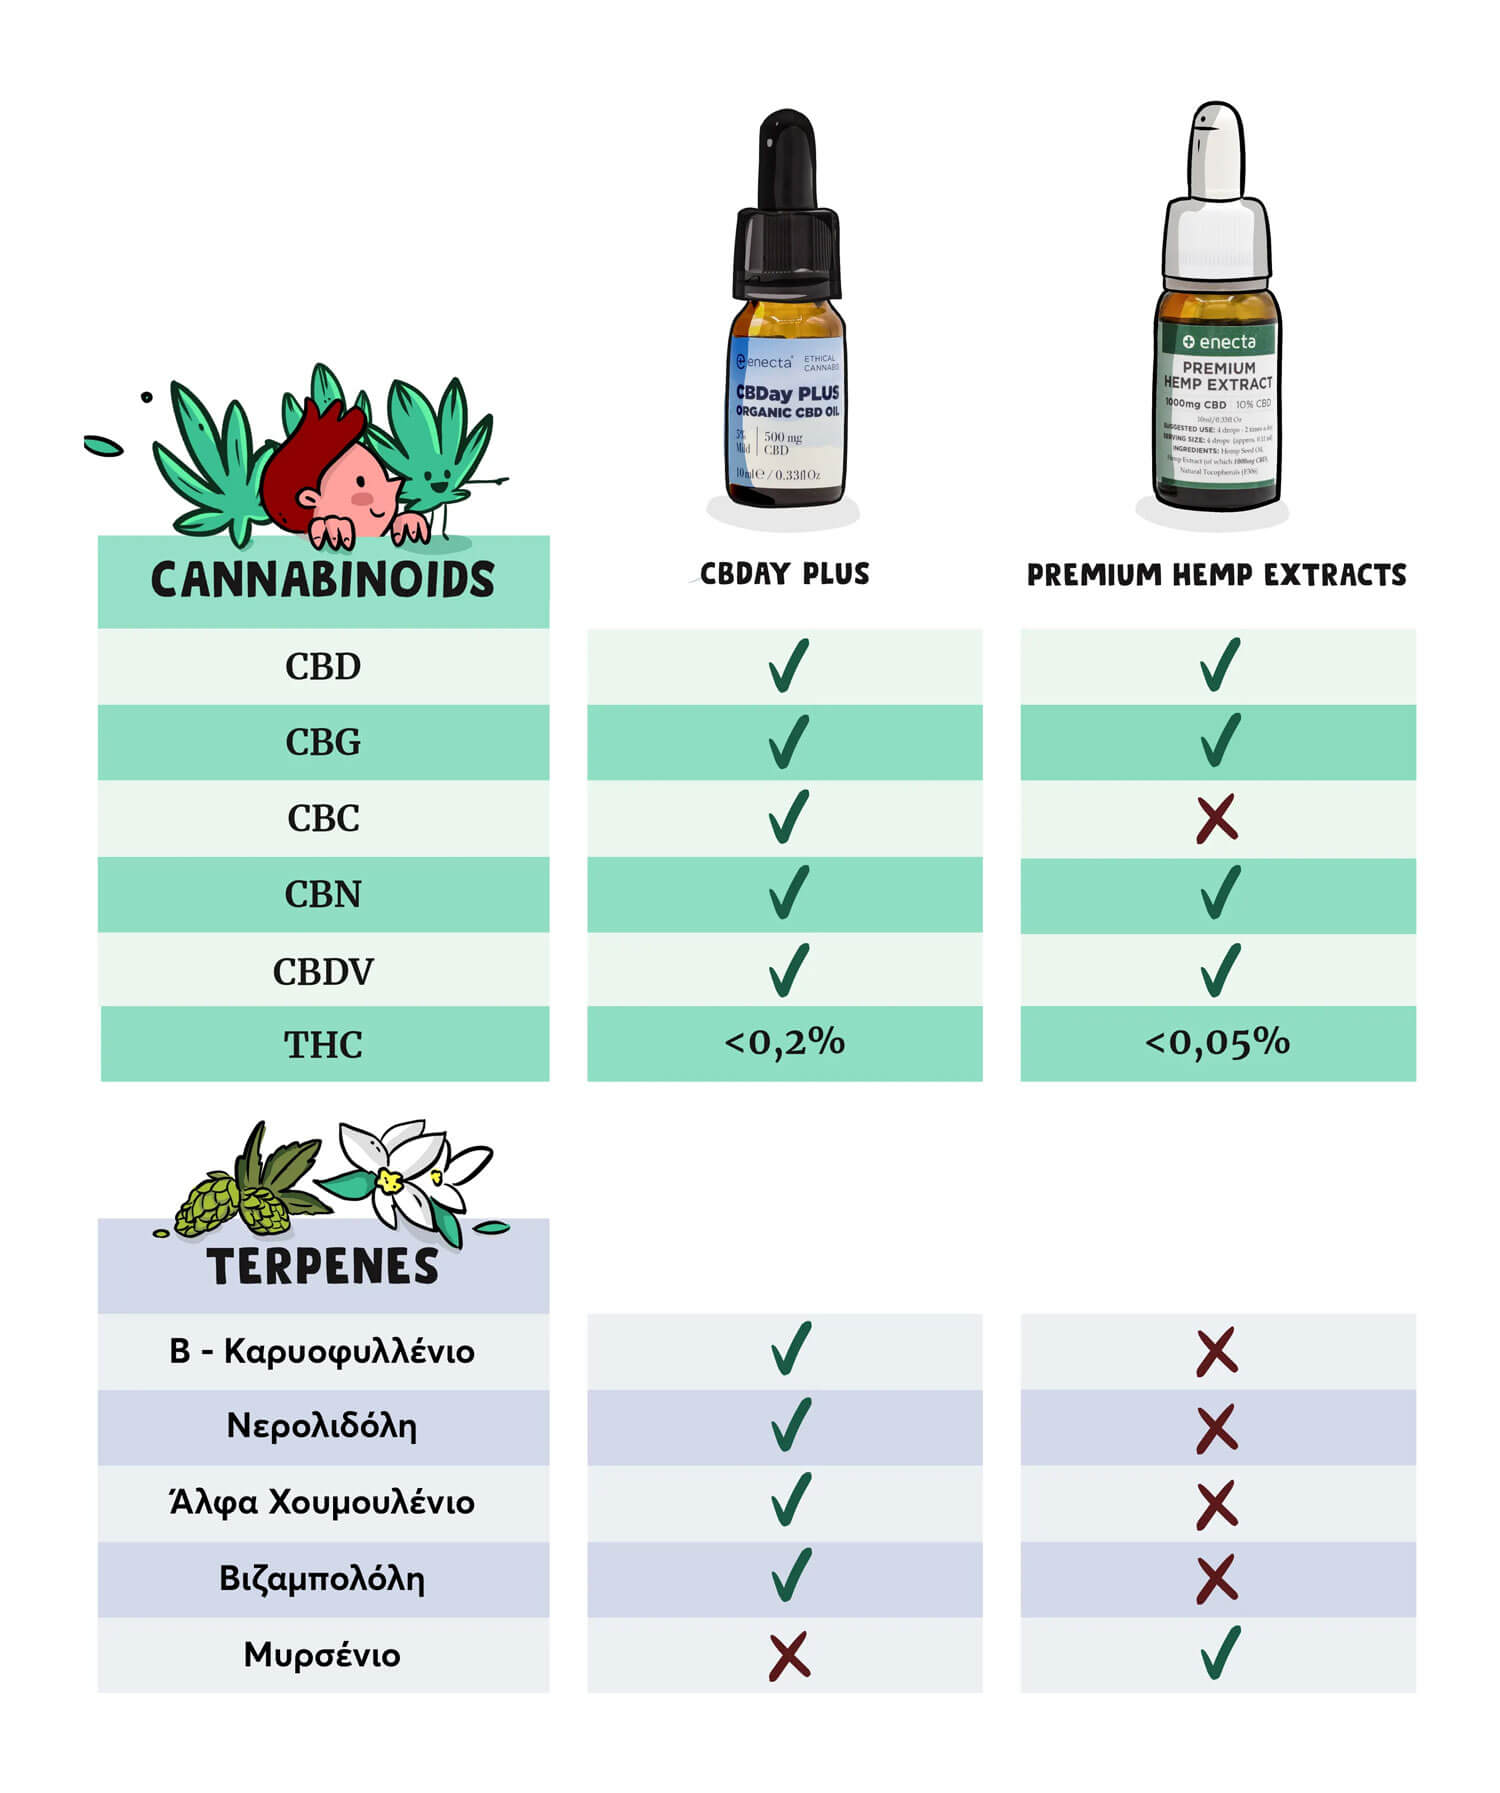 What are the main differences between CBDay Plus and CBD oil 10%